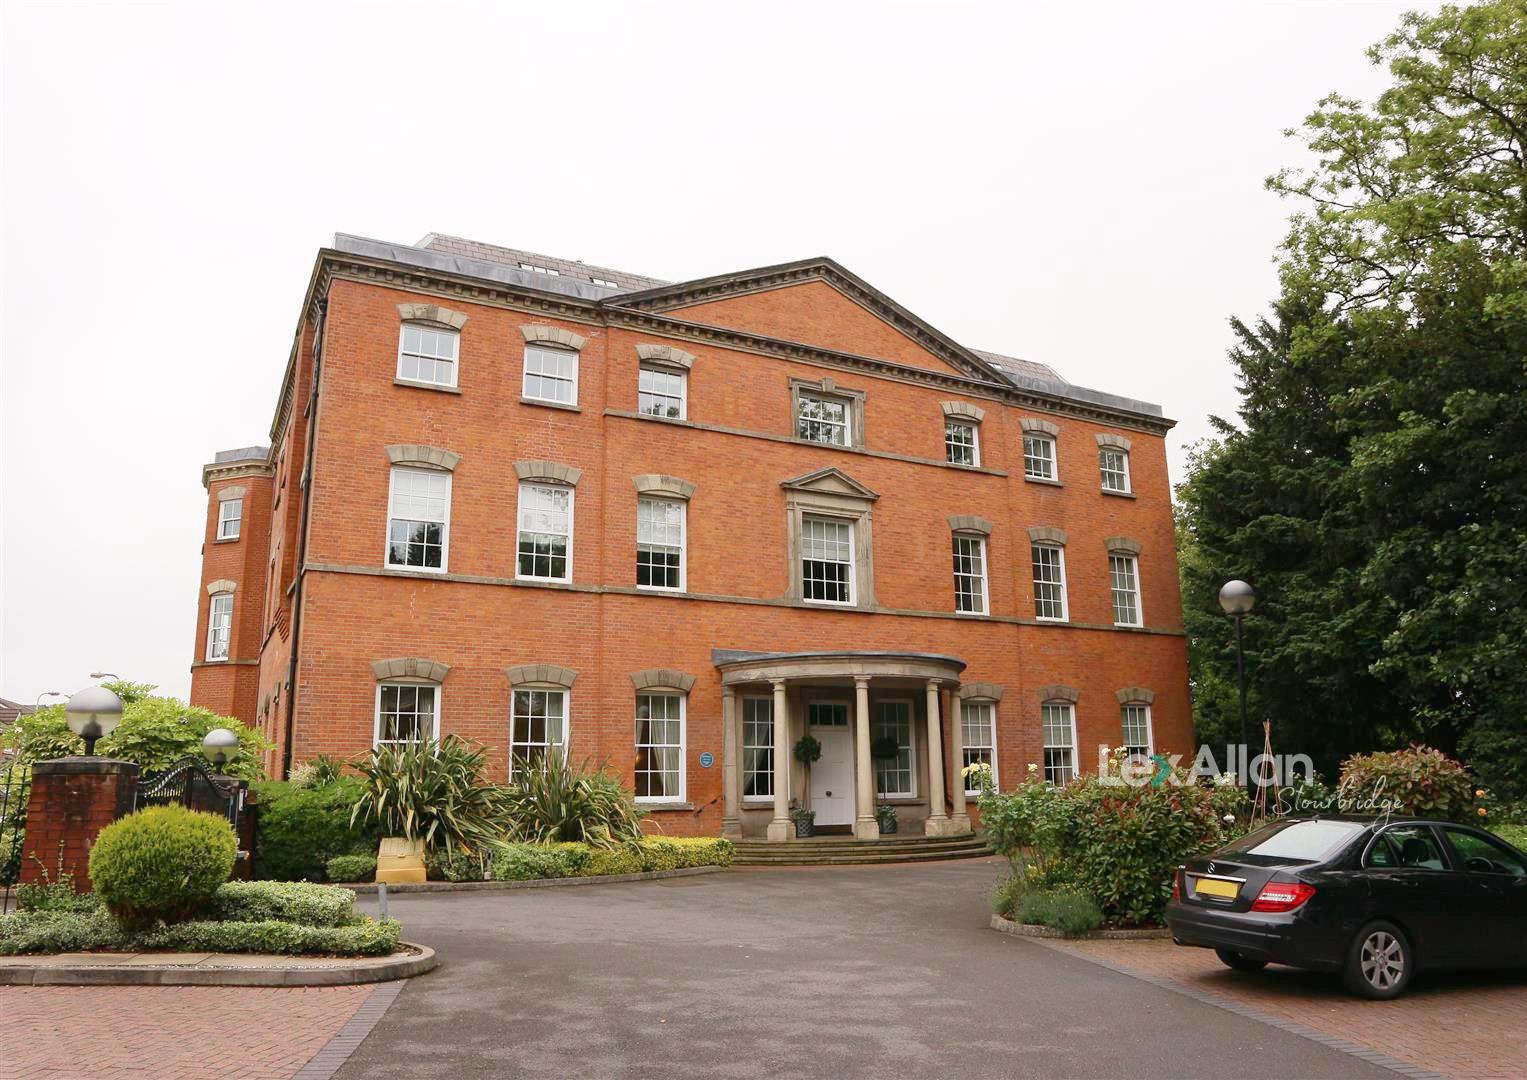 2 bed  for sale in Cameo Drive, Stourbridge, DY8 